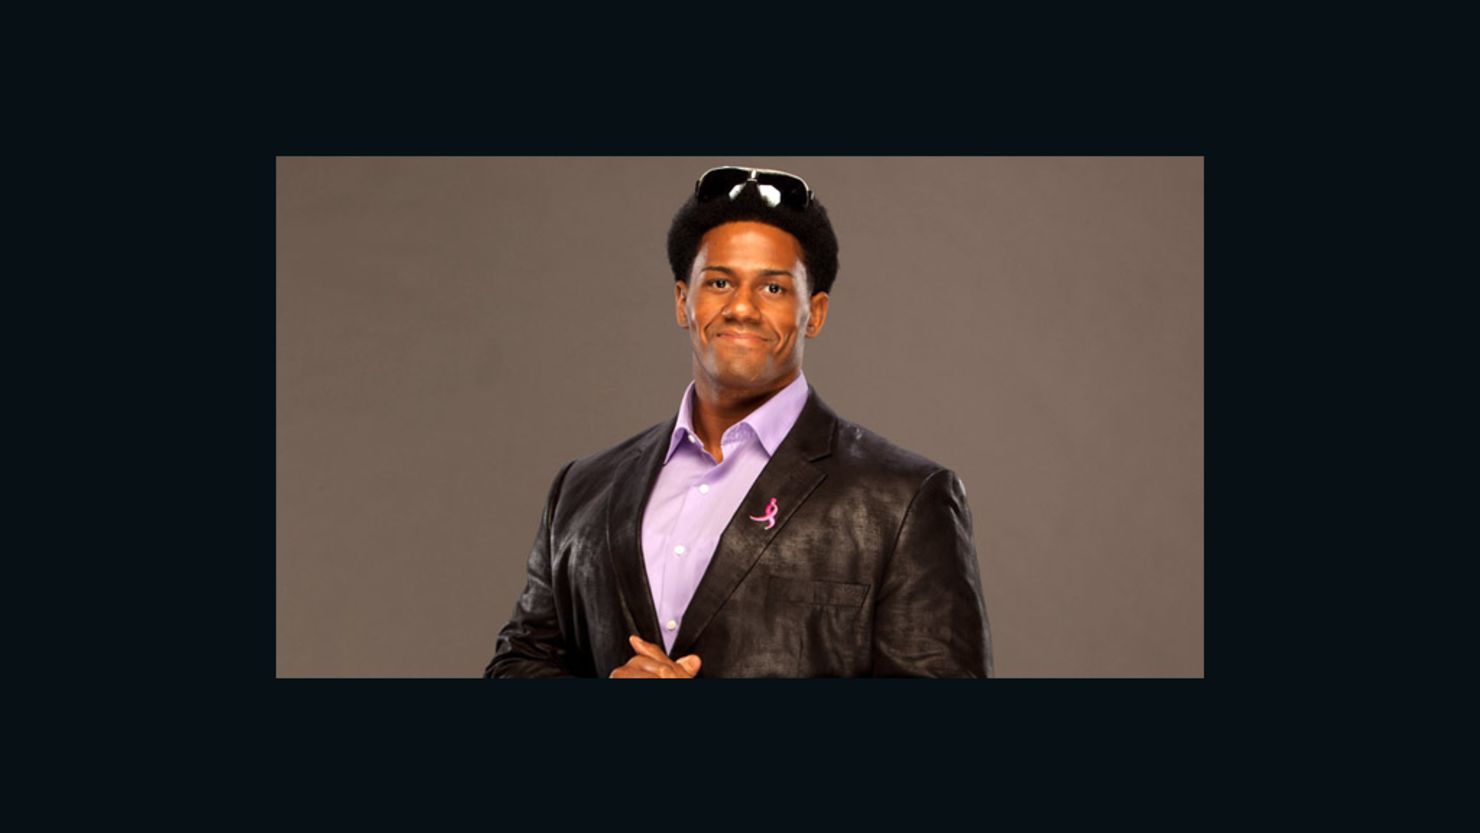 WWE wrestler Darren Young's coming out makes him the first openly gay professional wrestler.